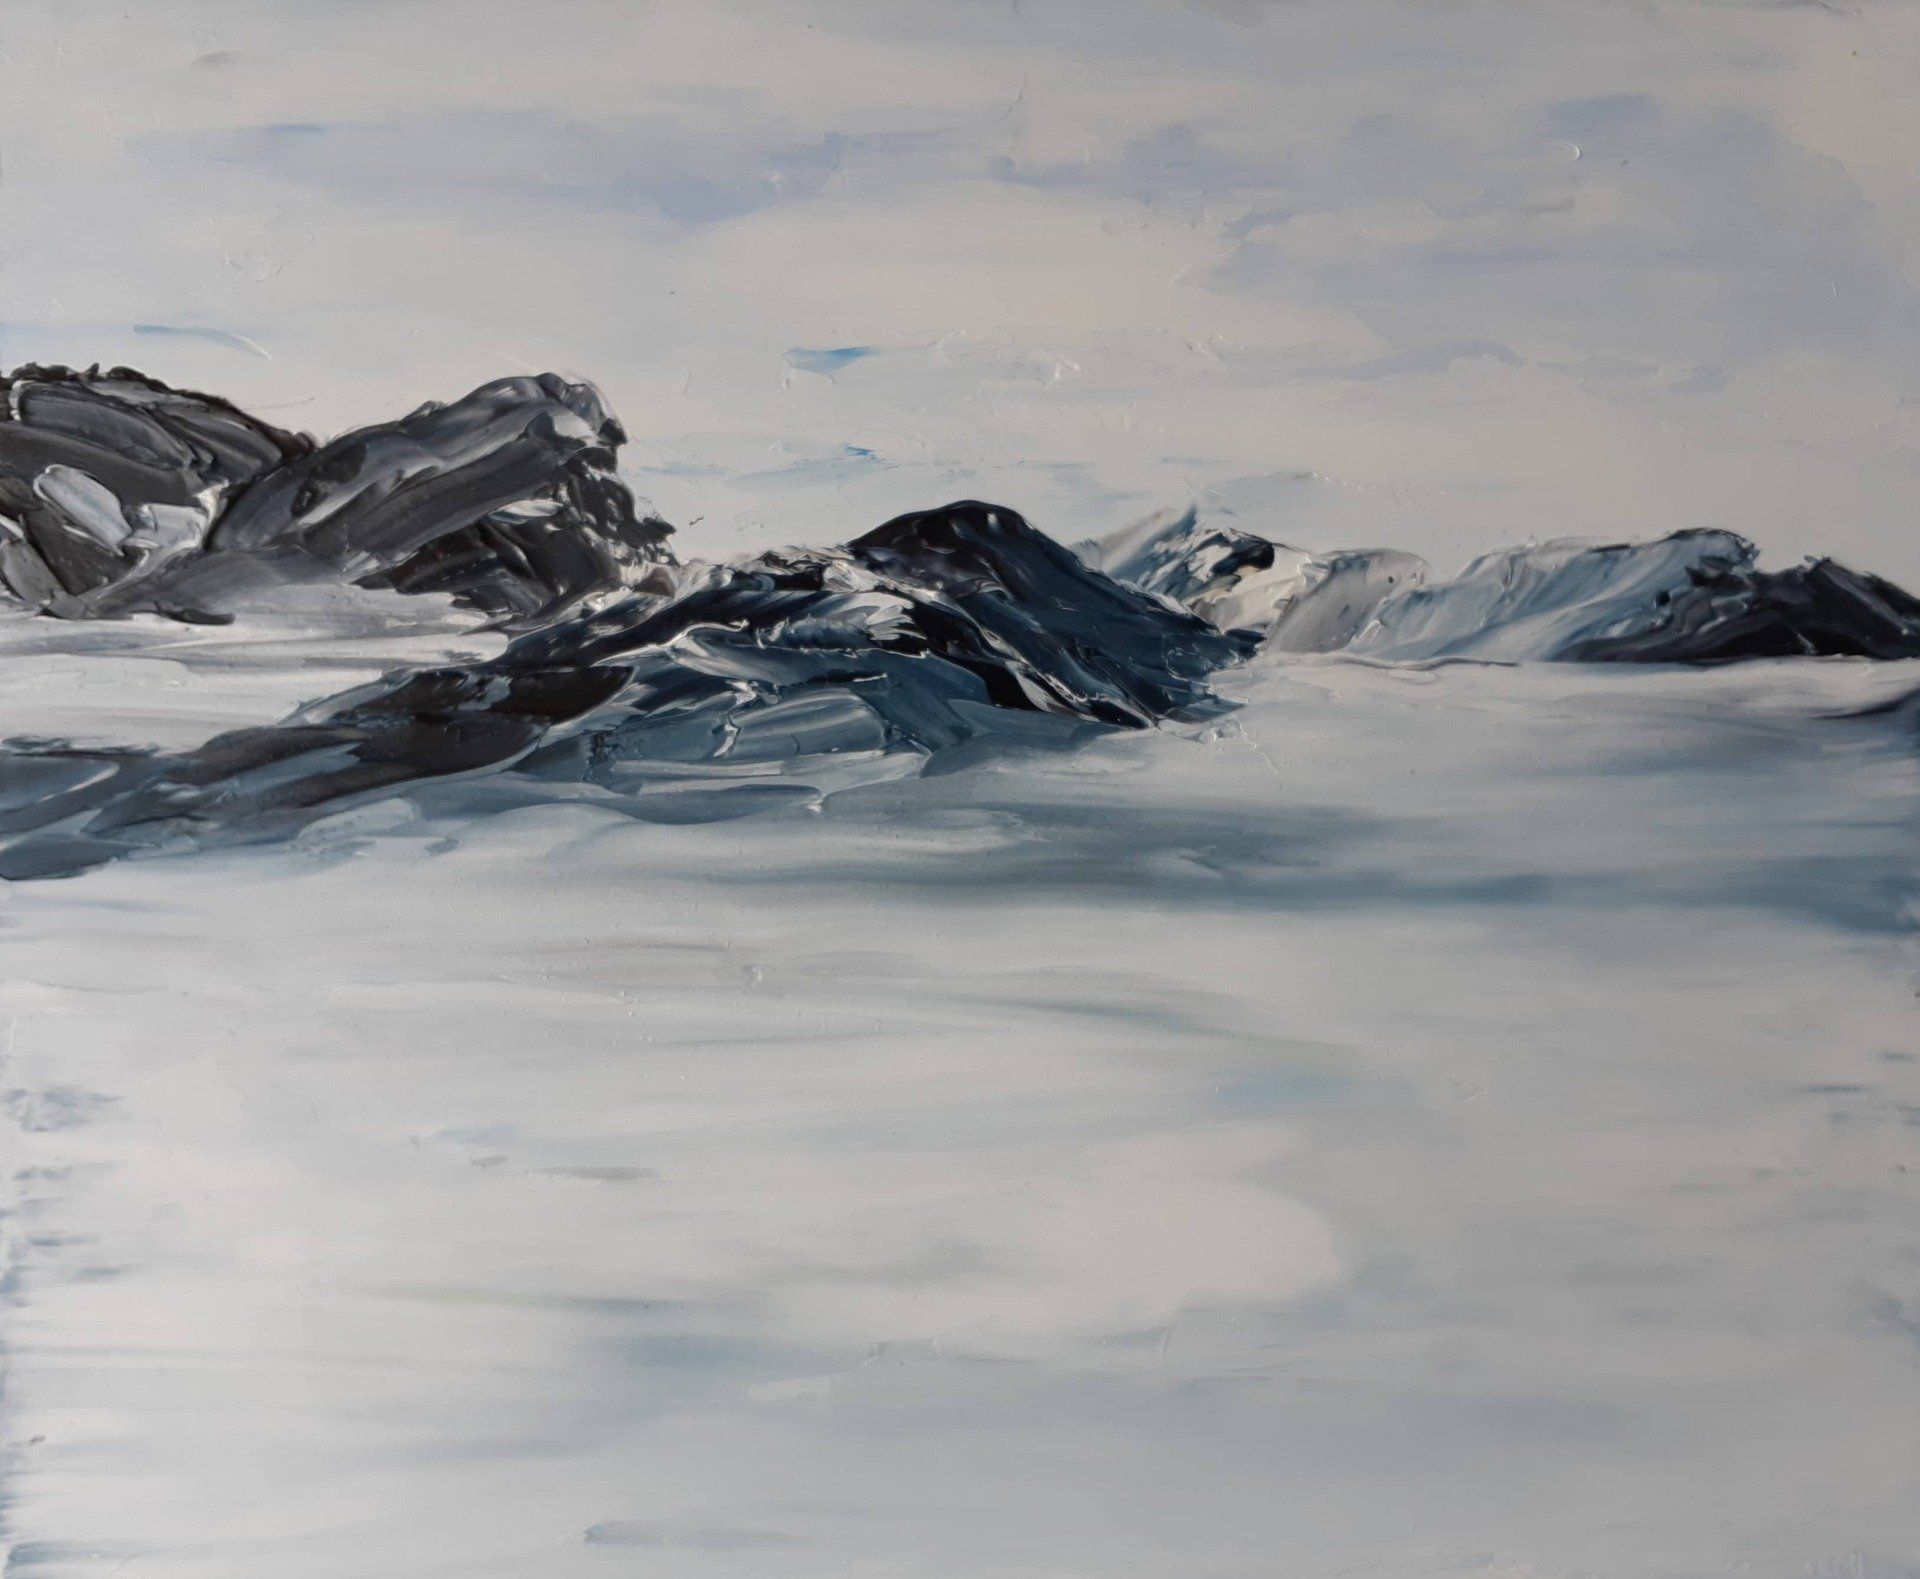 The sound of the mountain (1) Oil on Masonite 12 in. x 10 in. Between the sky and the foggy swirls thie mountain isfloating in that moody  yet calming  almost a pastoral scene. The blues and whites contrast the rocky bluish tones of the mountain tops.